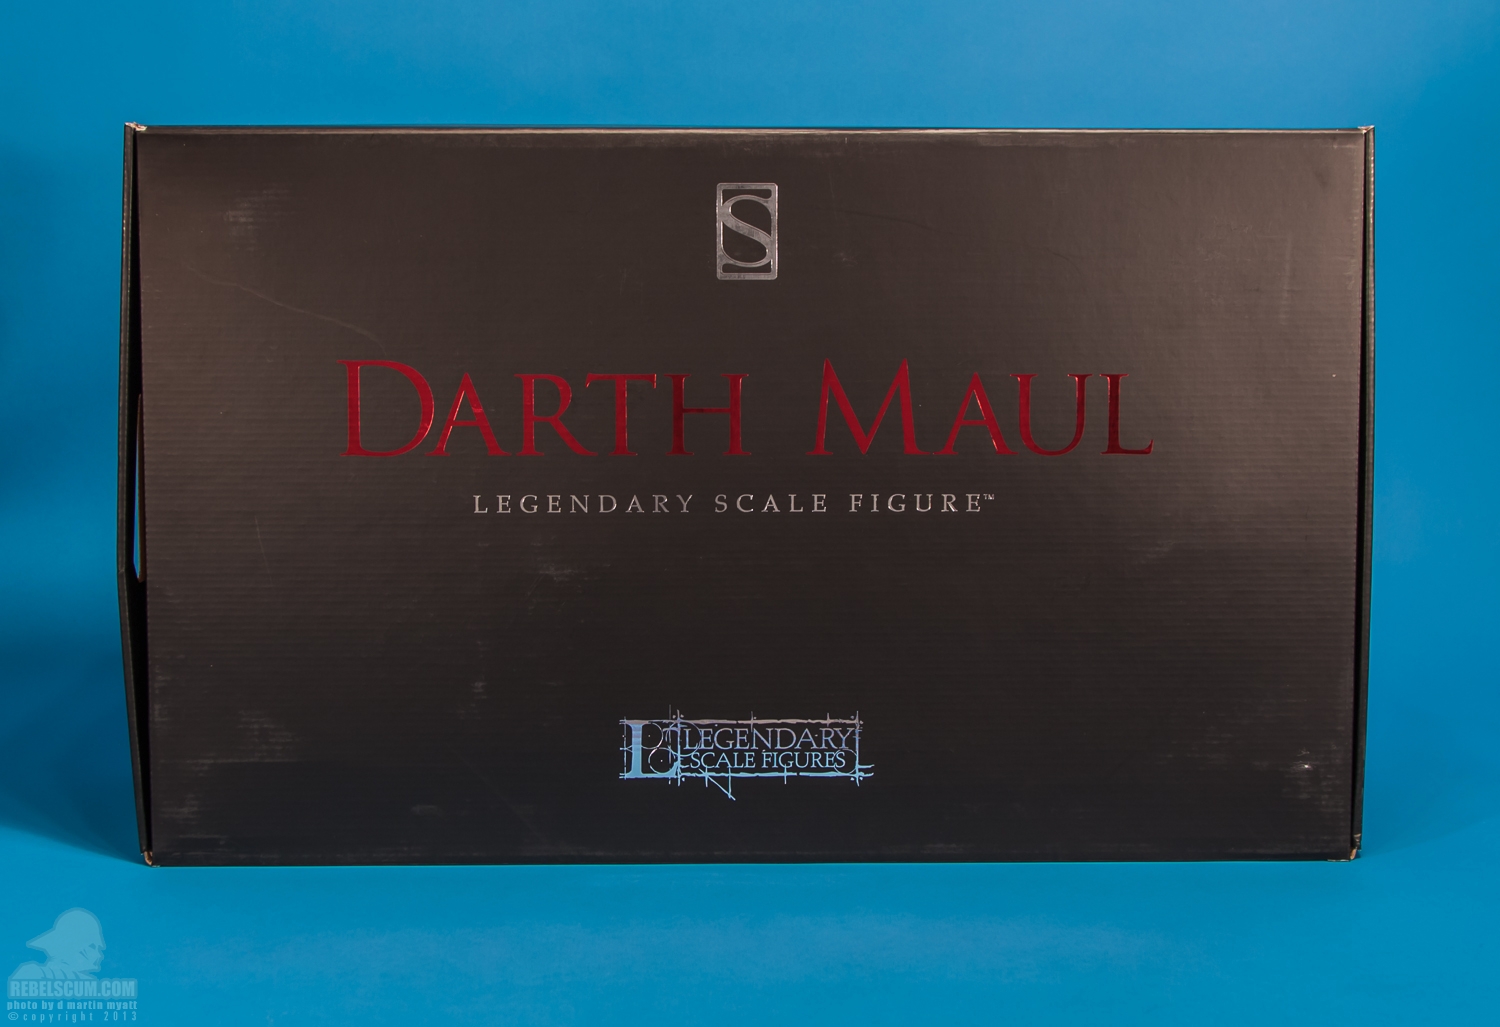 Darth_Maul_Legendary_Scale_Figure_Sideshow_Collectibles-40.jpg